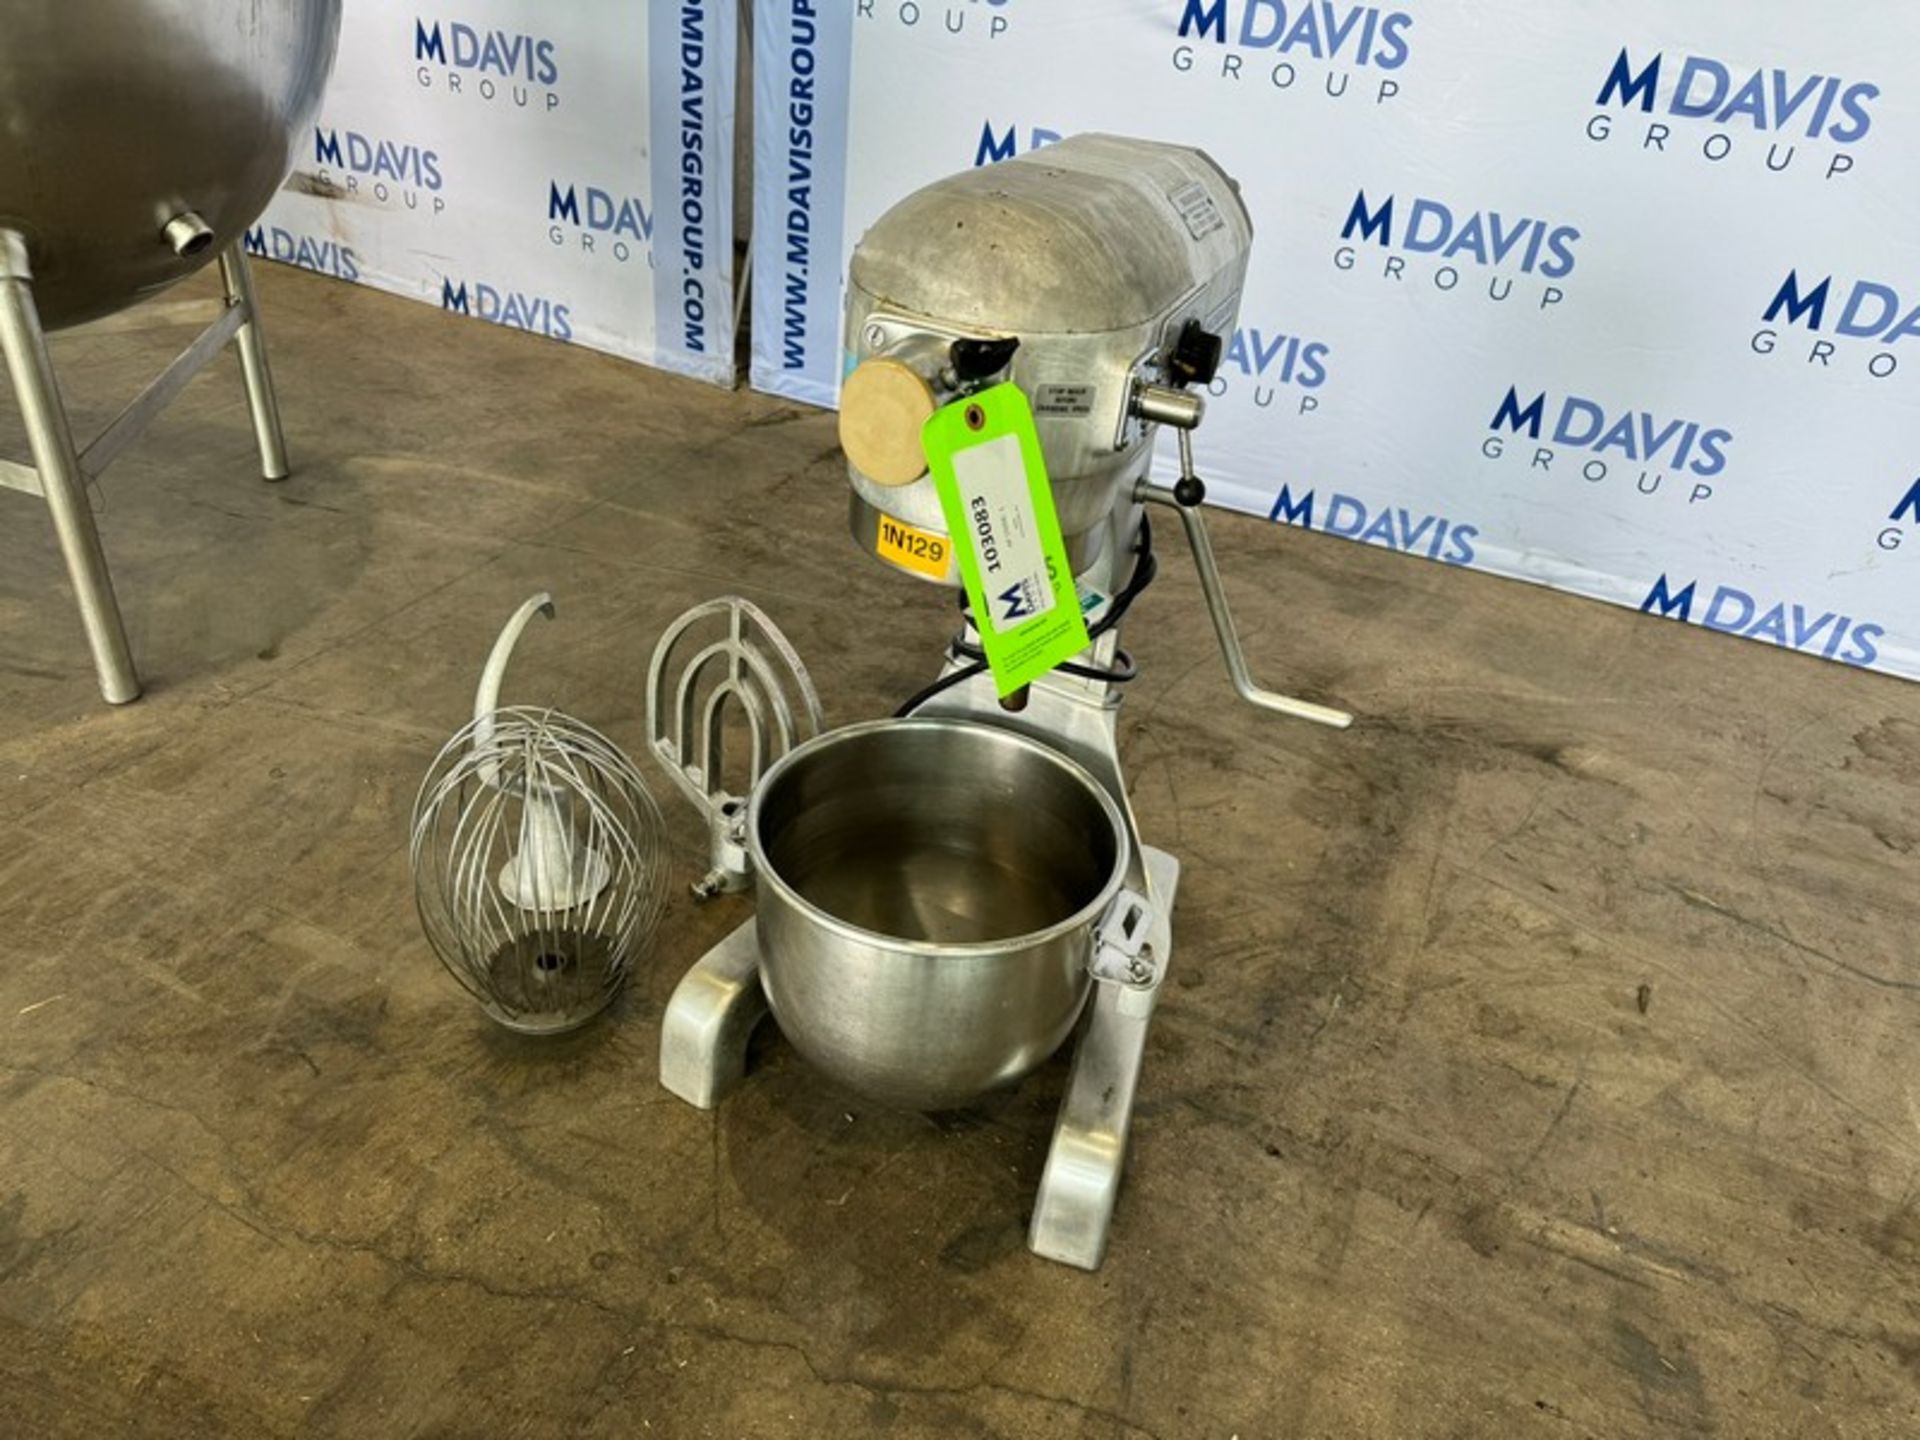 Hobart Mixer, M/N A-200DT, S/N 11-413-046, 115 Volts, 1725 RPM, with S/S Mixing Bowl, Whip, & - Image 3 of 6